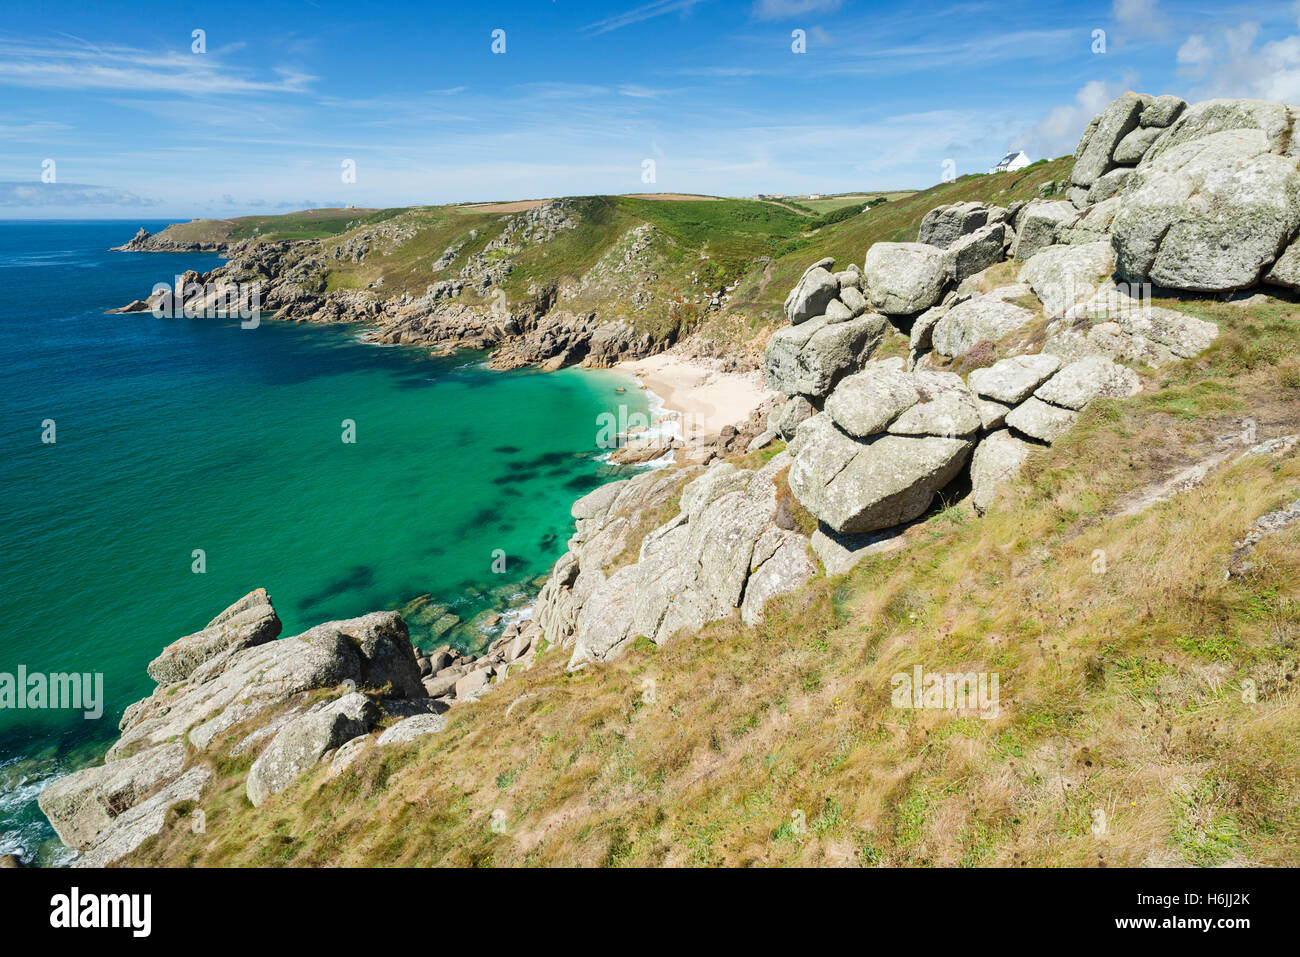 Turquoise sea, rocky cliffs at the bright sandy Porth Chapel Beach on Penwith Peninsula on the south coast of Cornwall, England, UK in summer Stock Photo